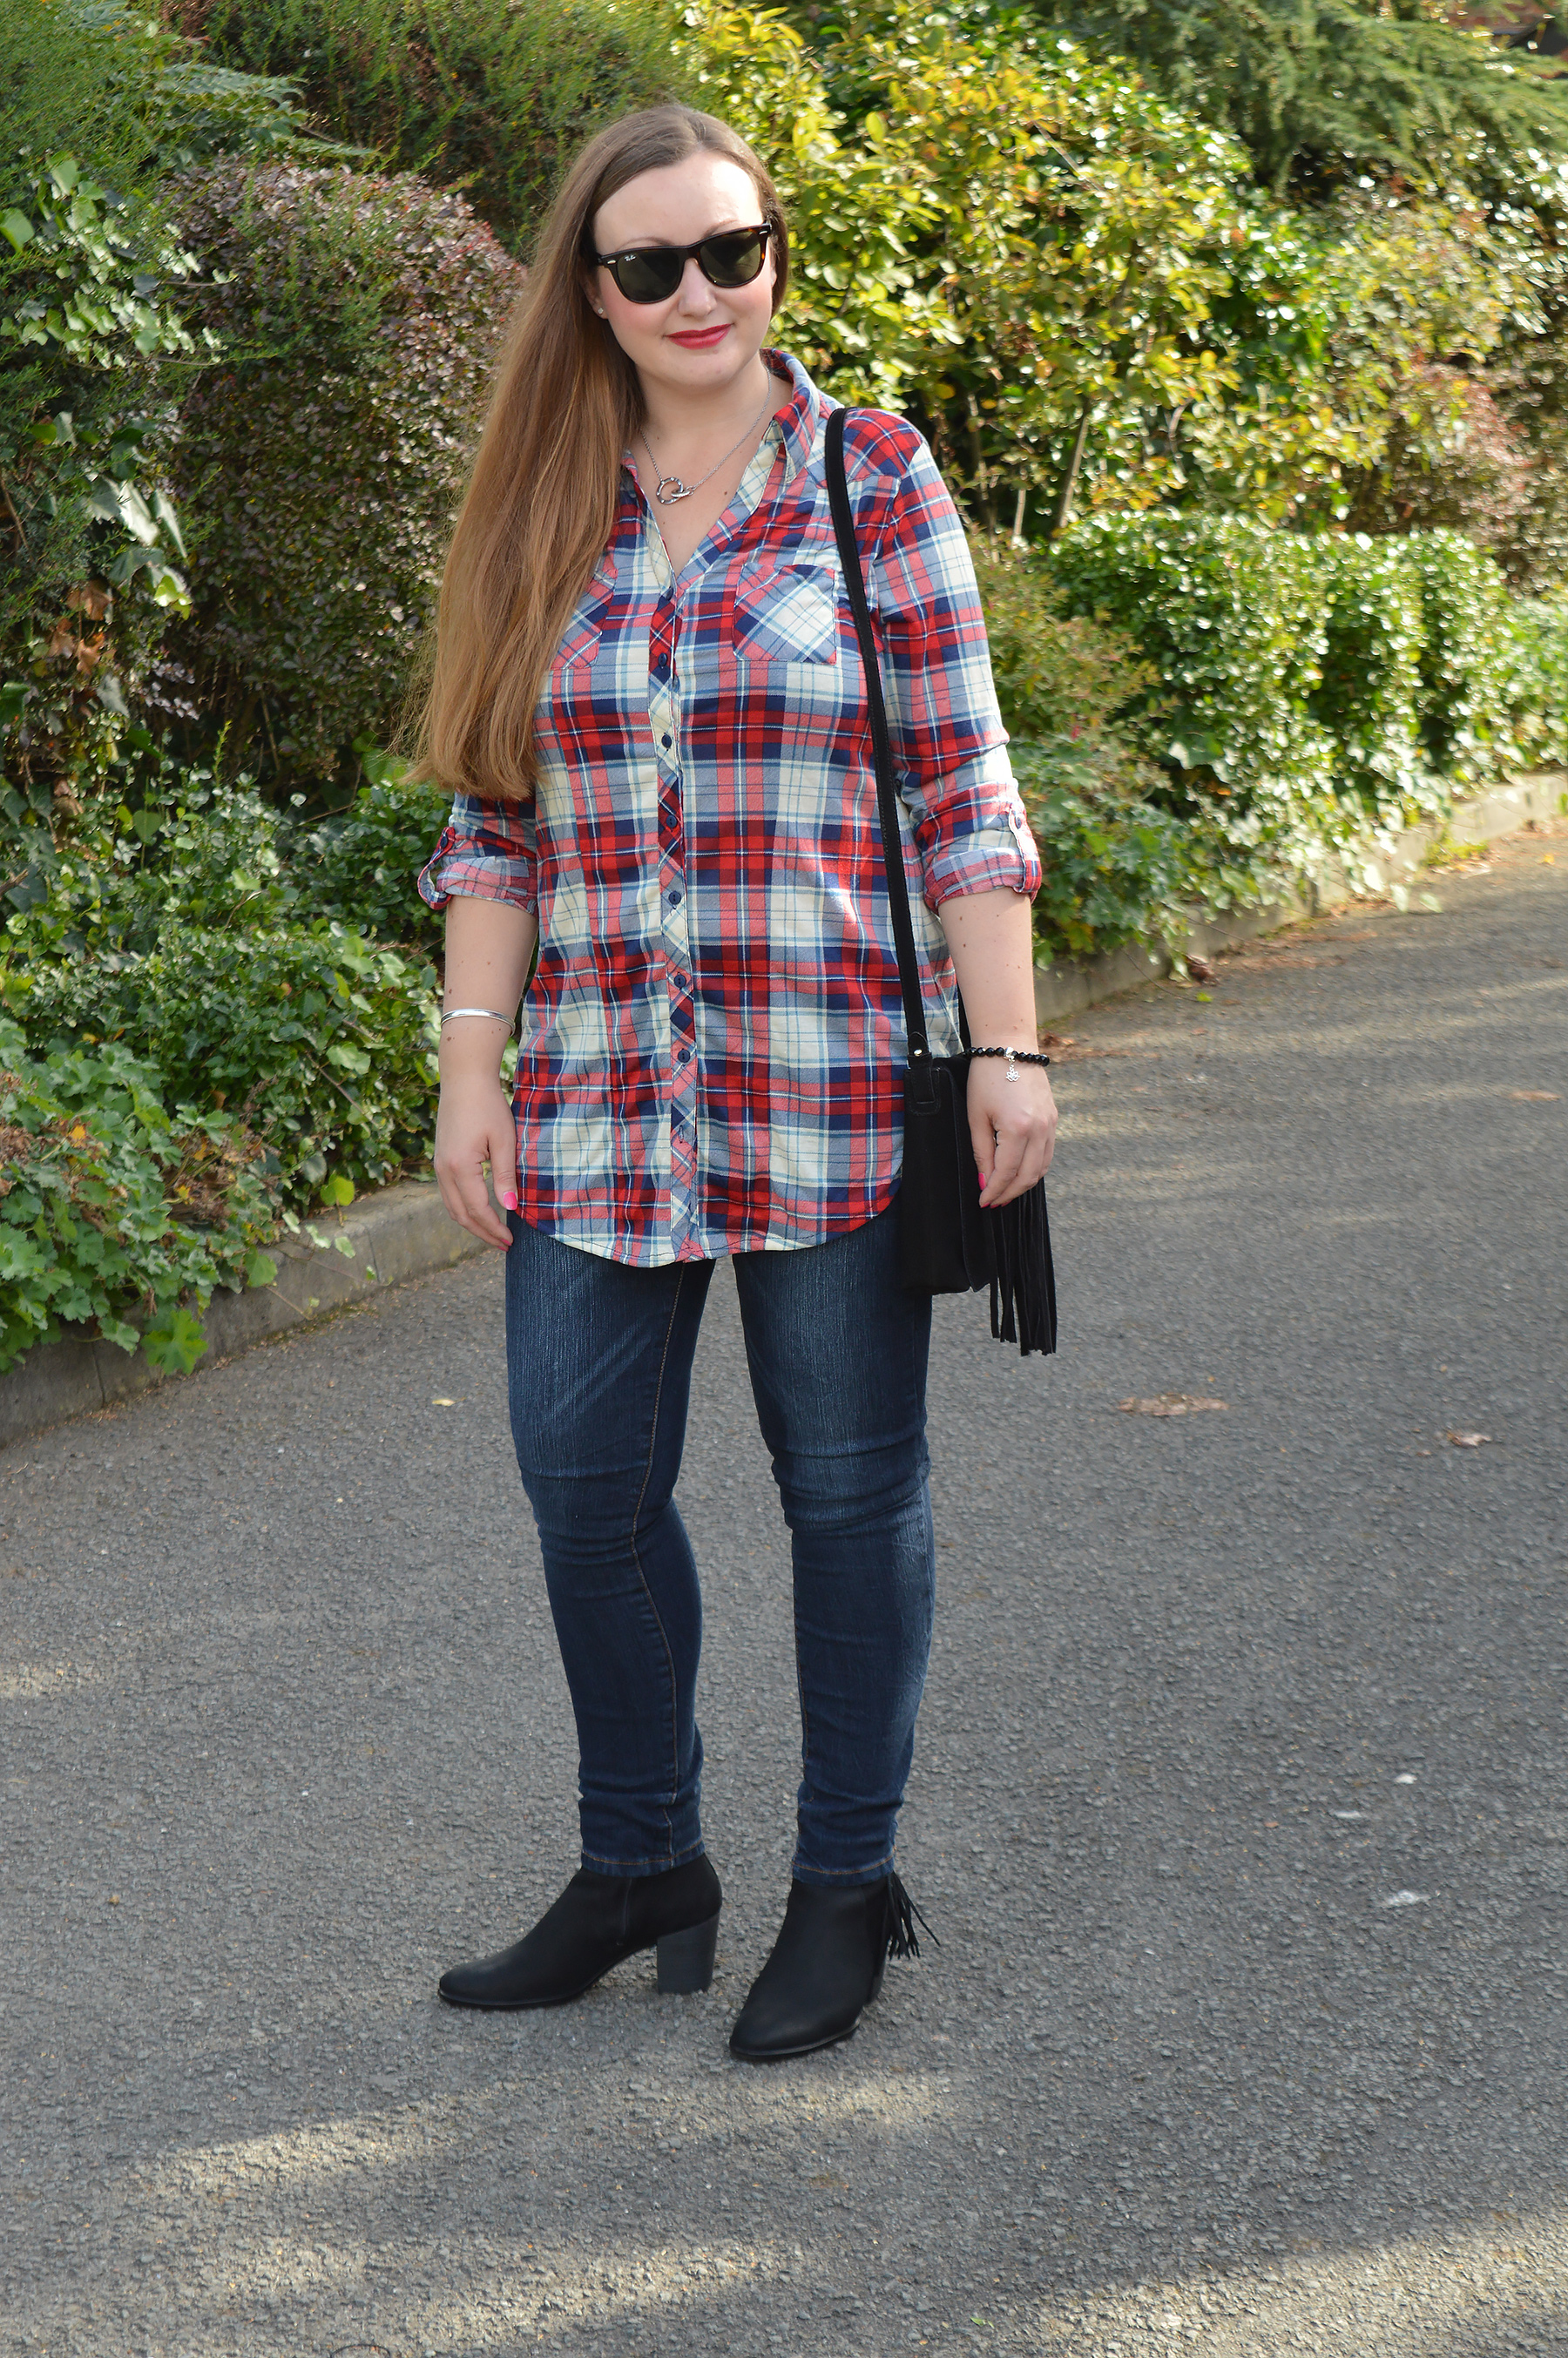 Autumn check shirt outfit